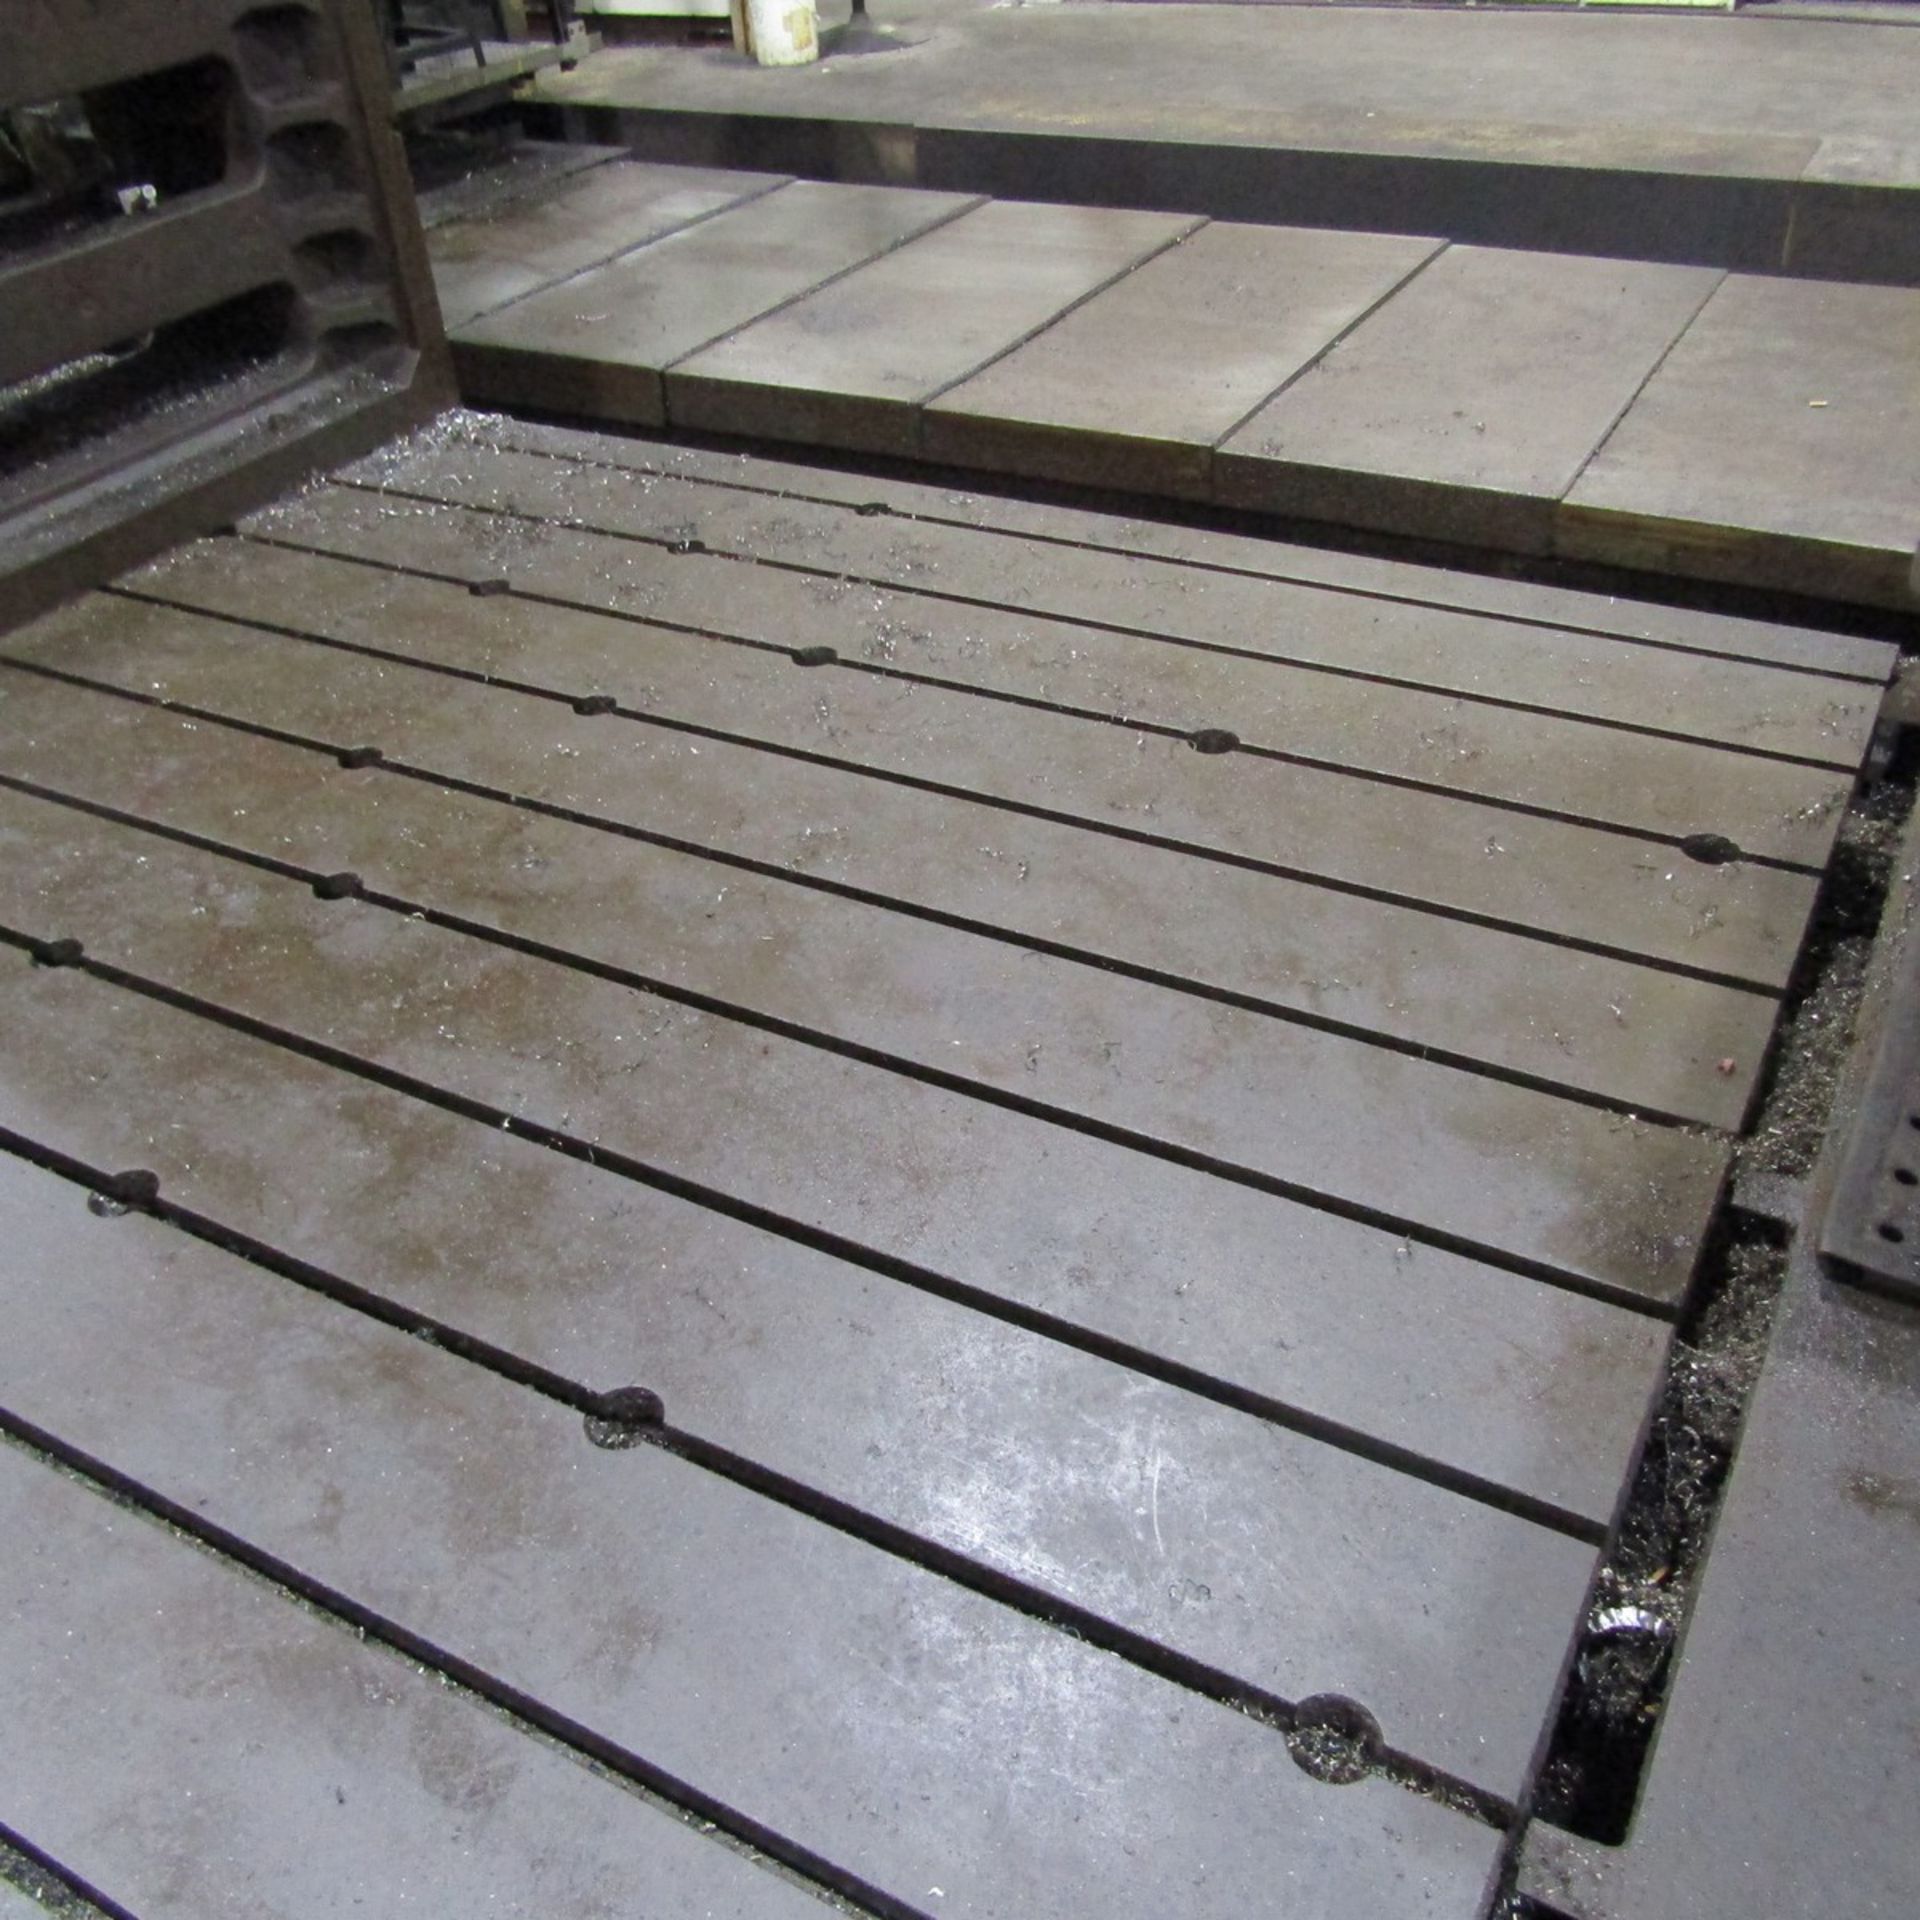 10 ft. x 21-1/2 ft. (approx.) Full Length T-Slotted Floor Plate (Sold - Subject to Bulk Bid) - Image 2 of 3